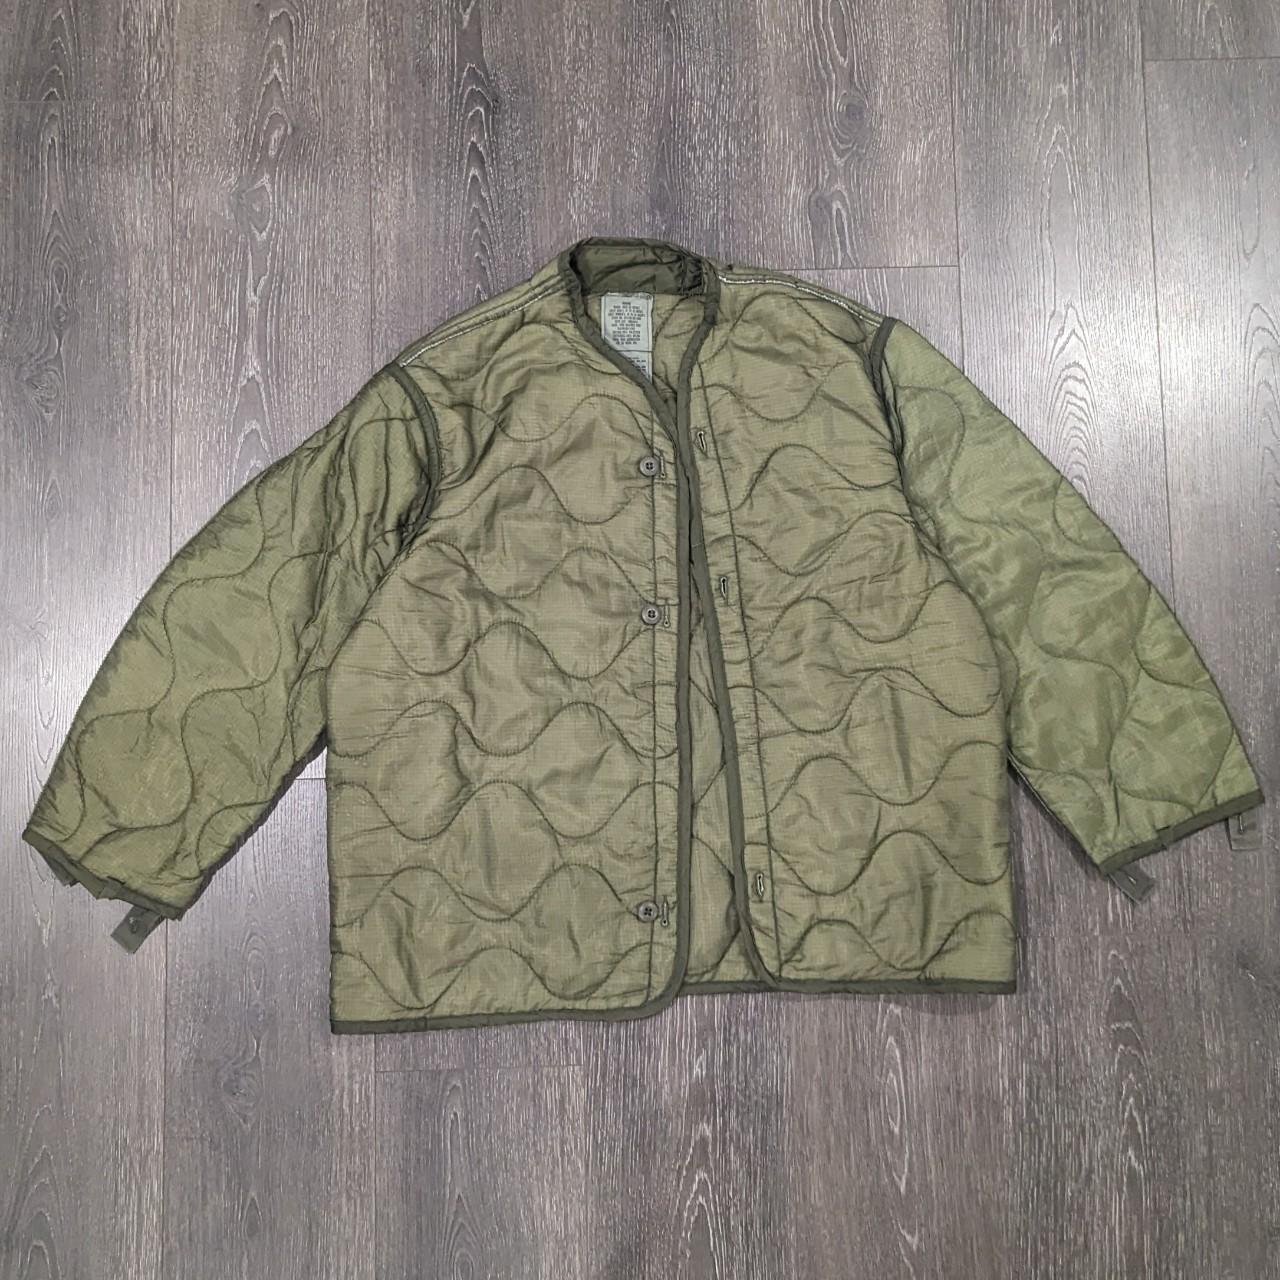 Vintage Military Liner Jacket Small flaw at the... - Depop